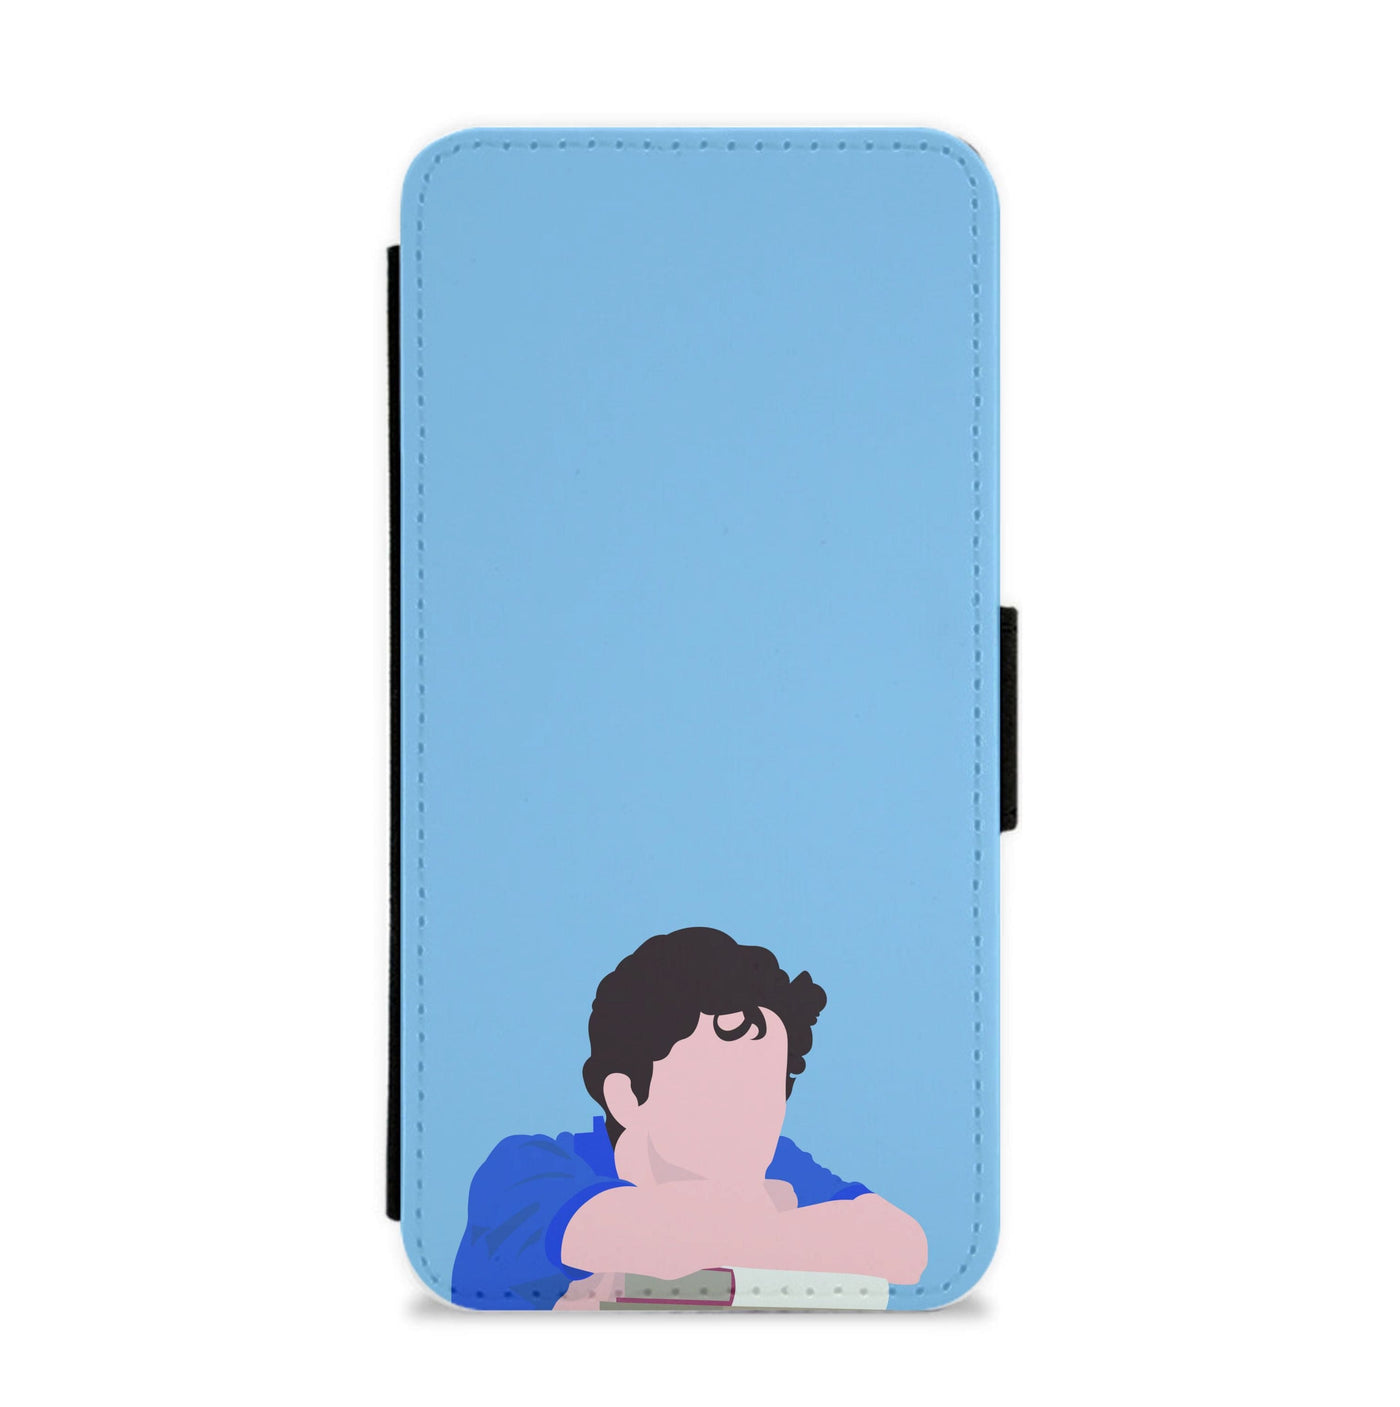 Call Me By Your Name - Timothée Chalamet Flip / Wallet Phone Case